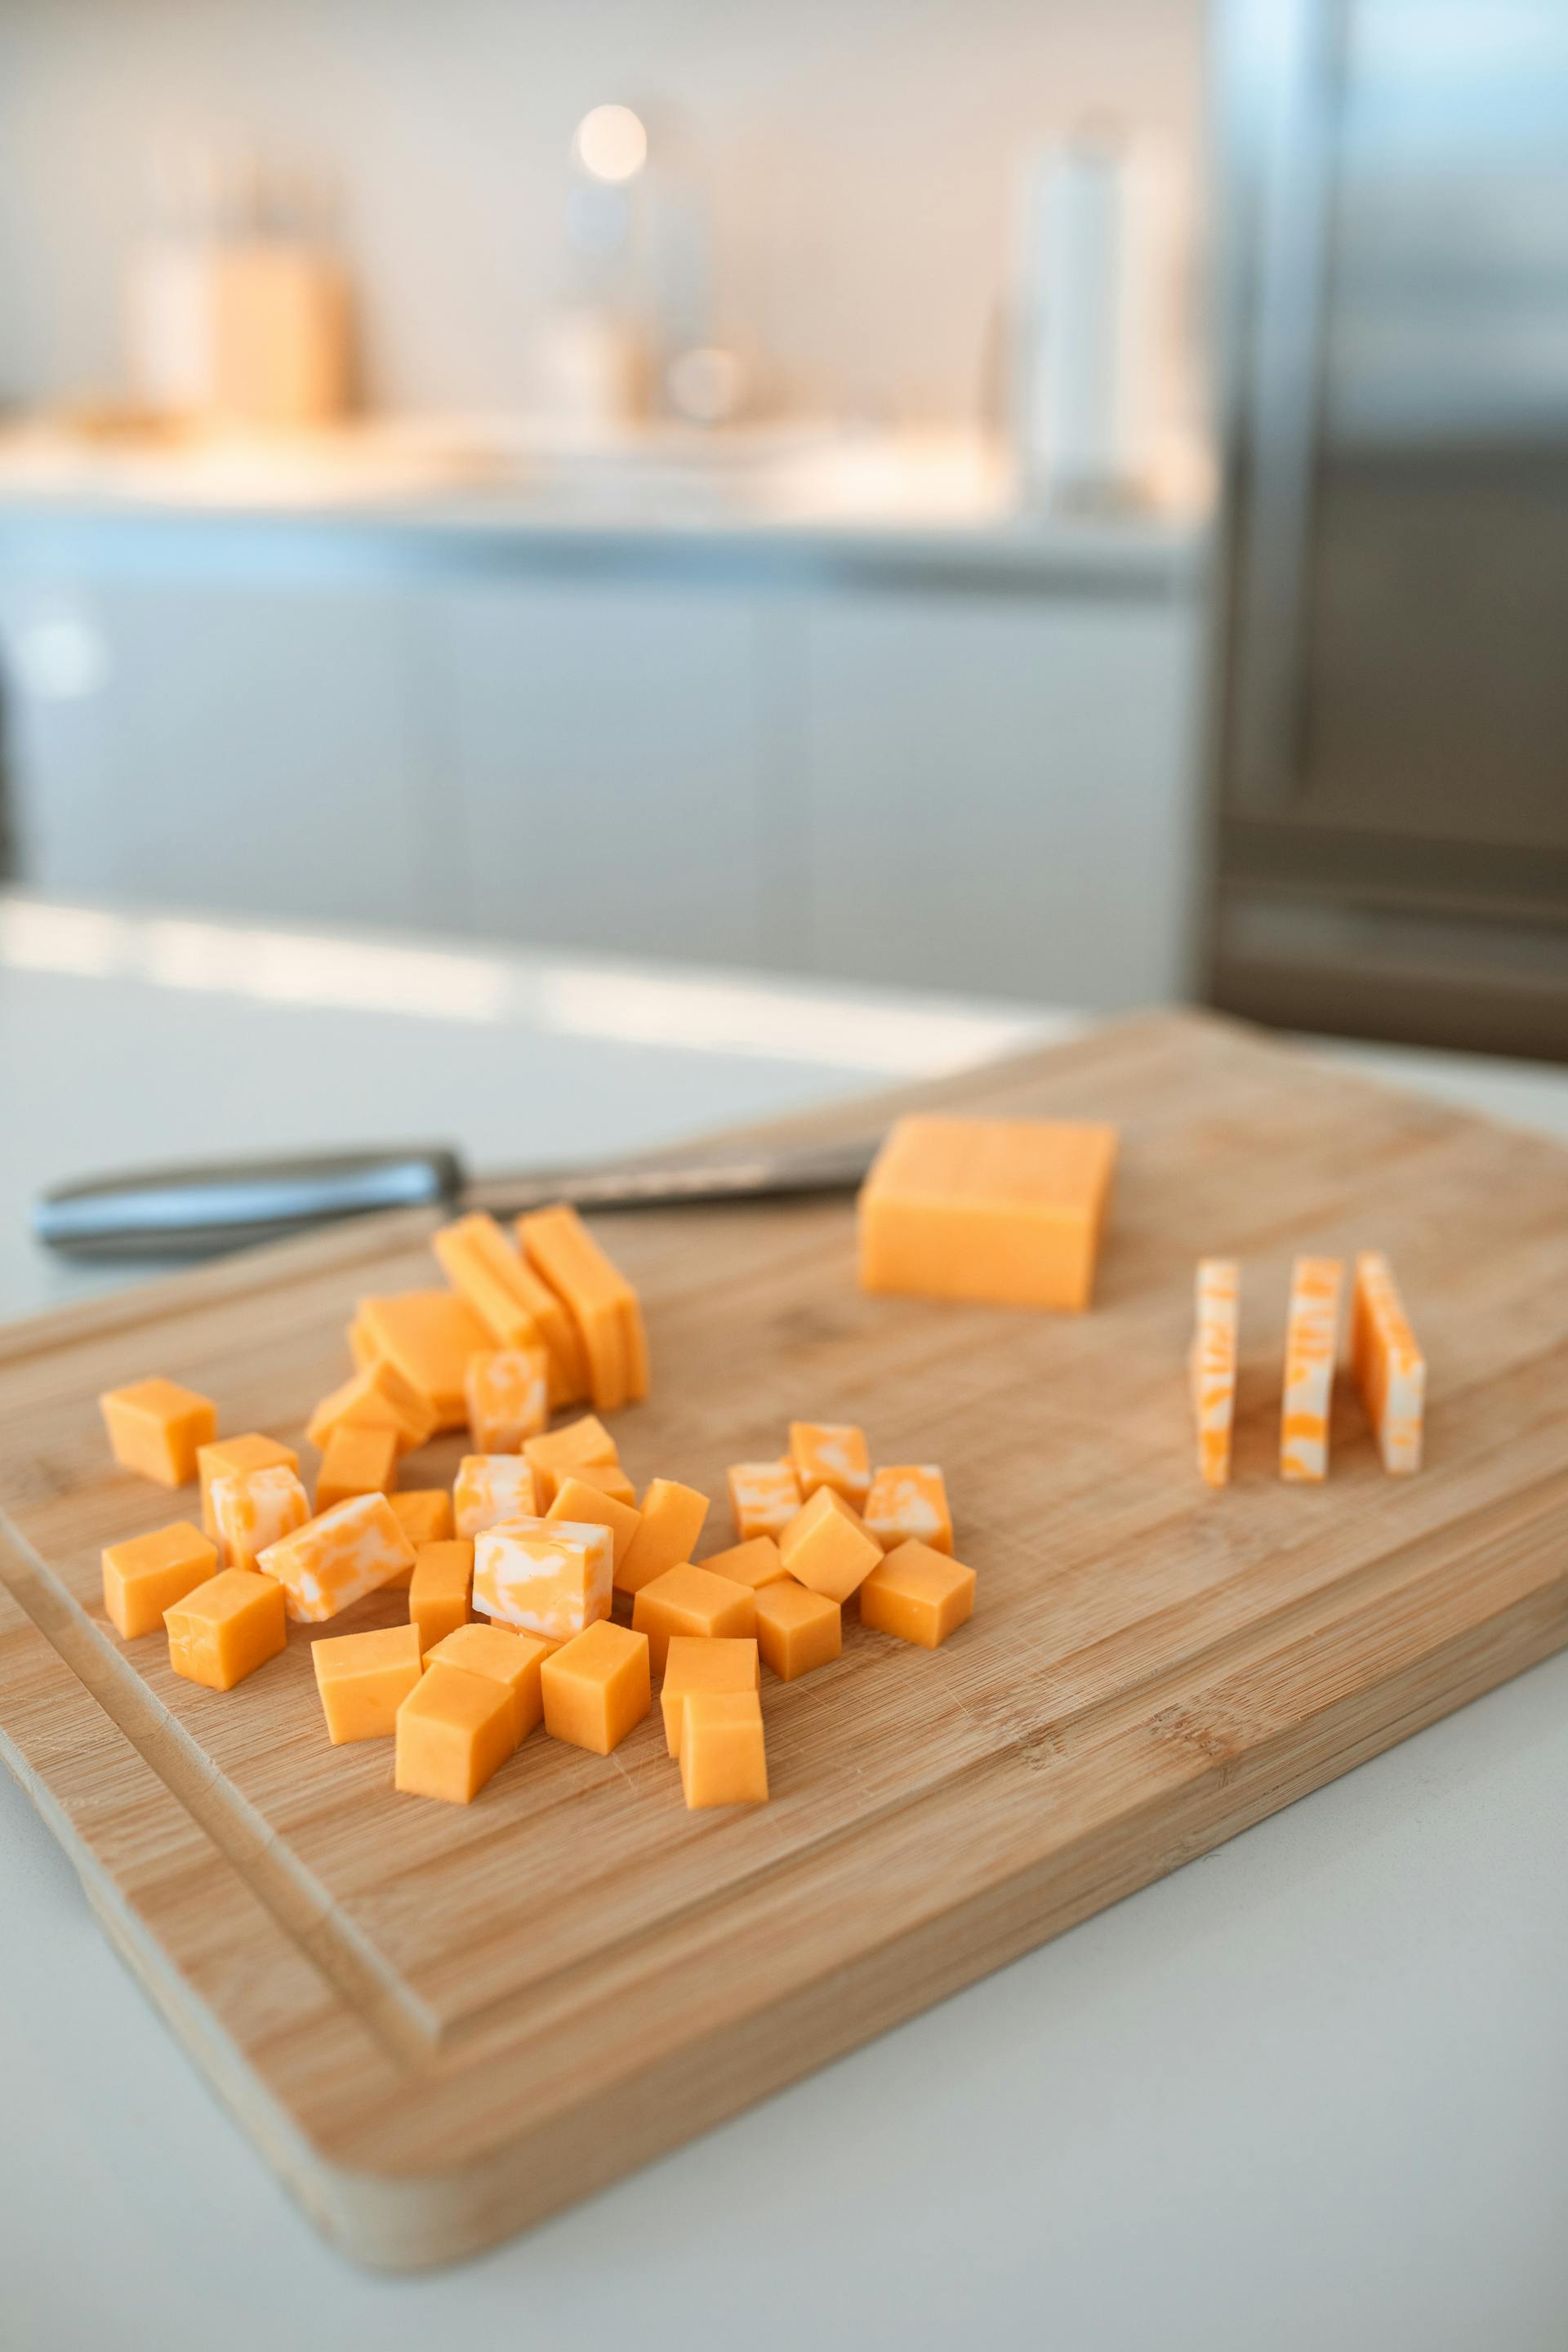 How Long Can Cheese Slices Last In The Fridge? | Fridge.com